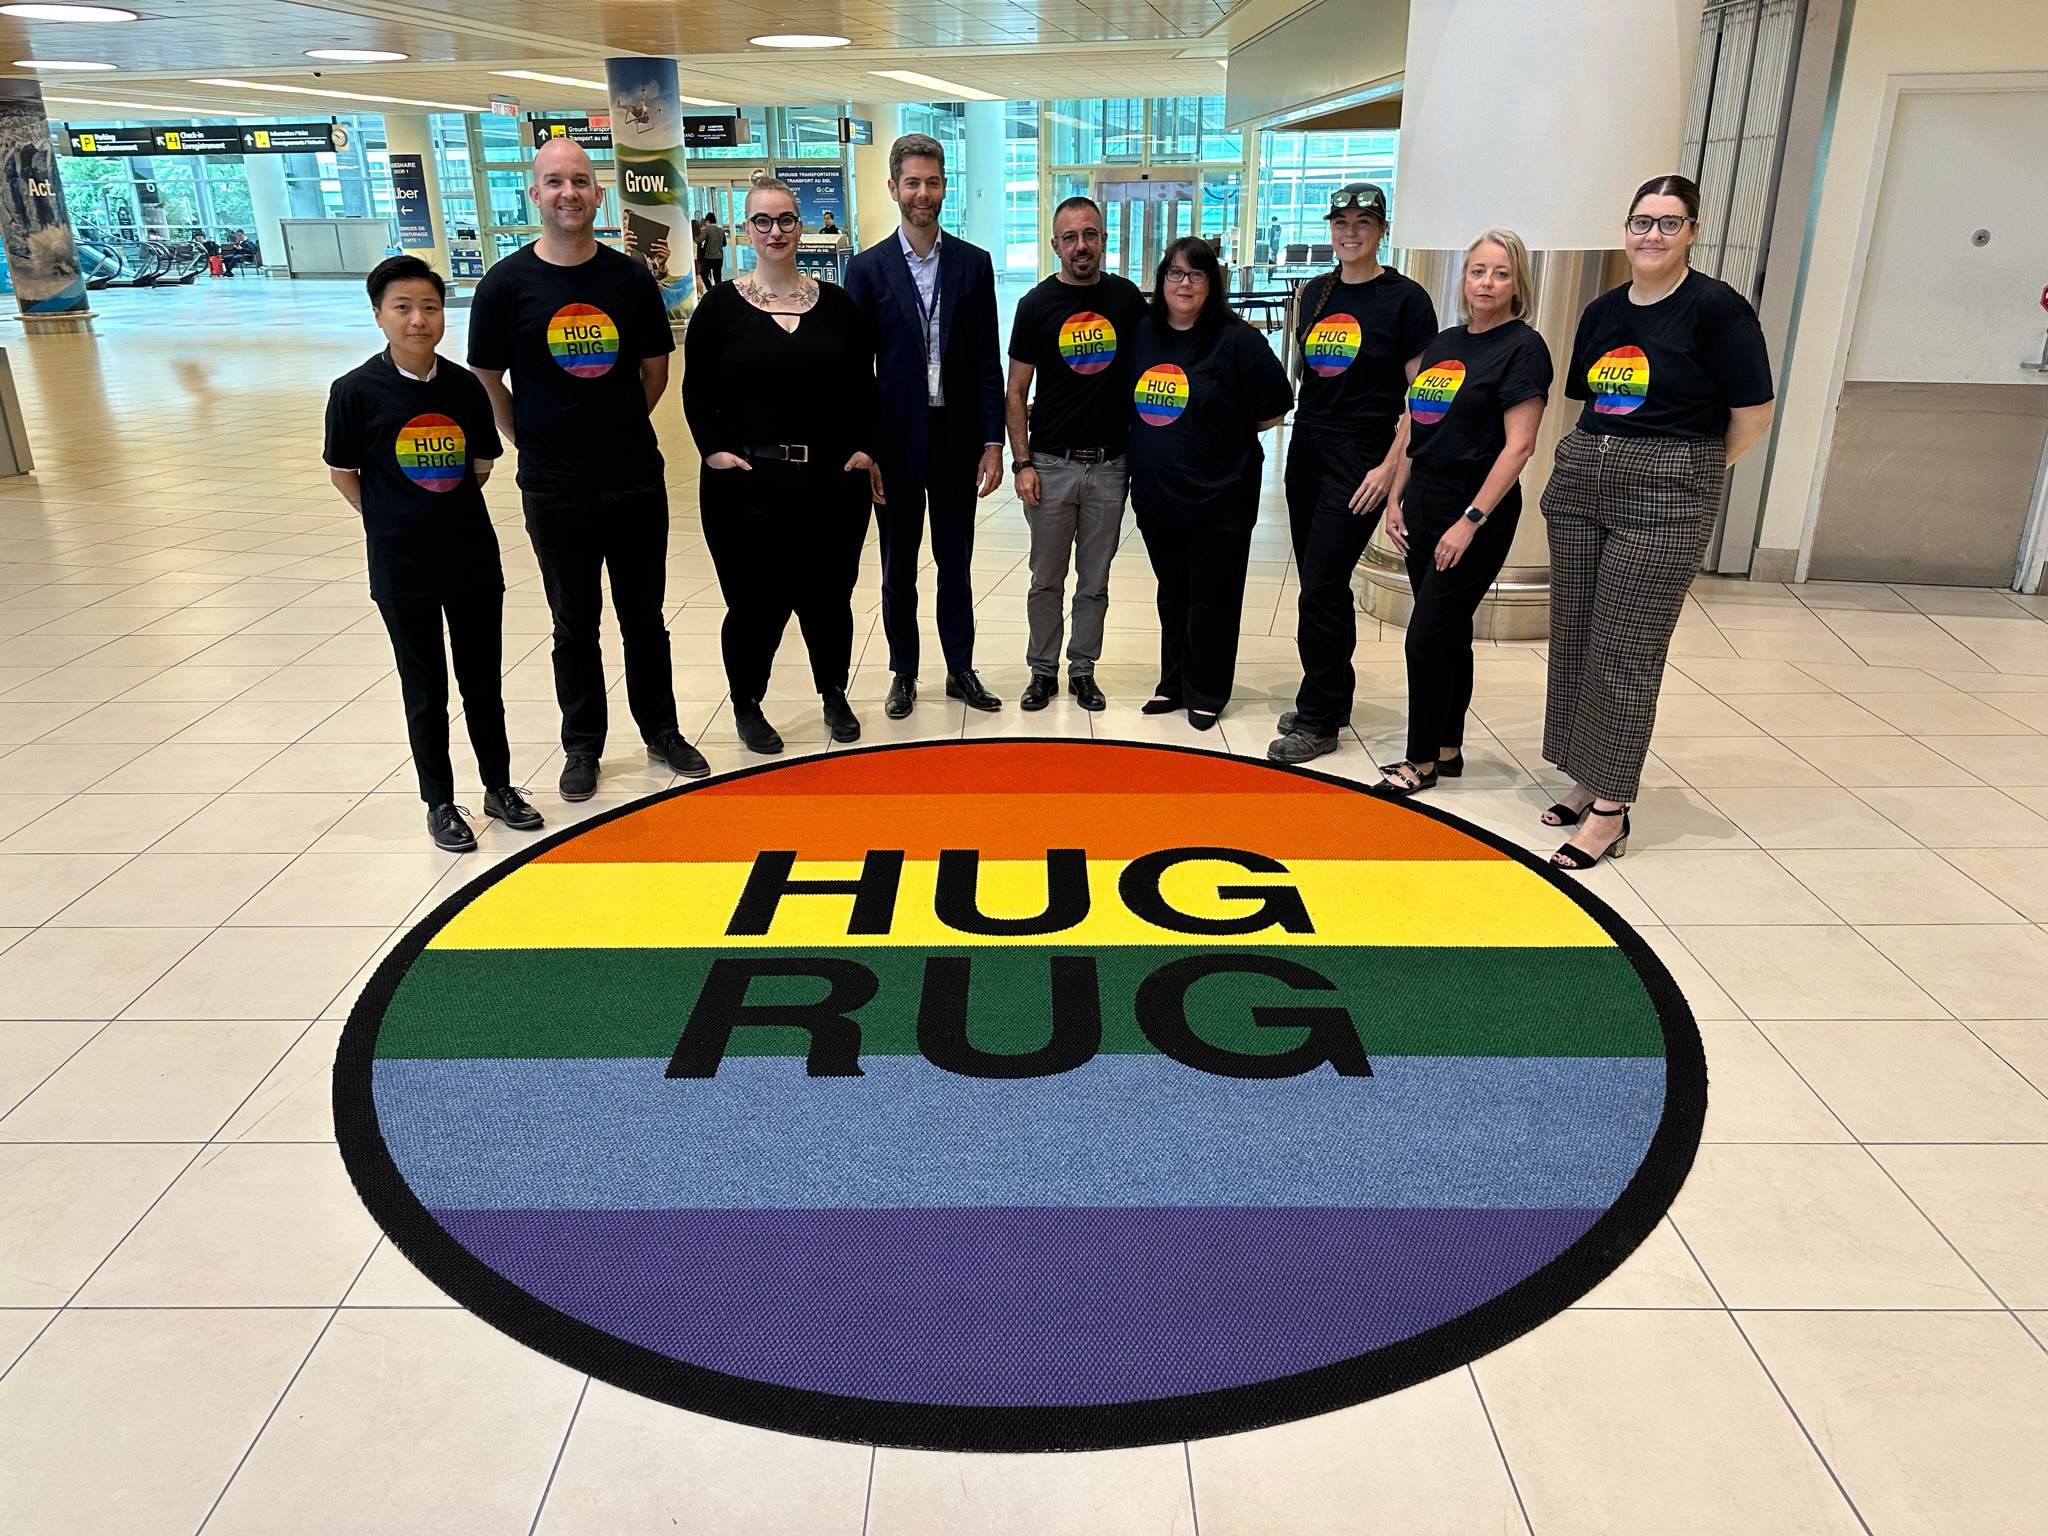 WAA employees are shown standing around a pride-themed Hug Rug in the Arrivals Hall of Winnipeg Richardson International Airport.